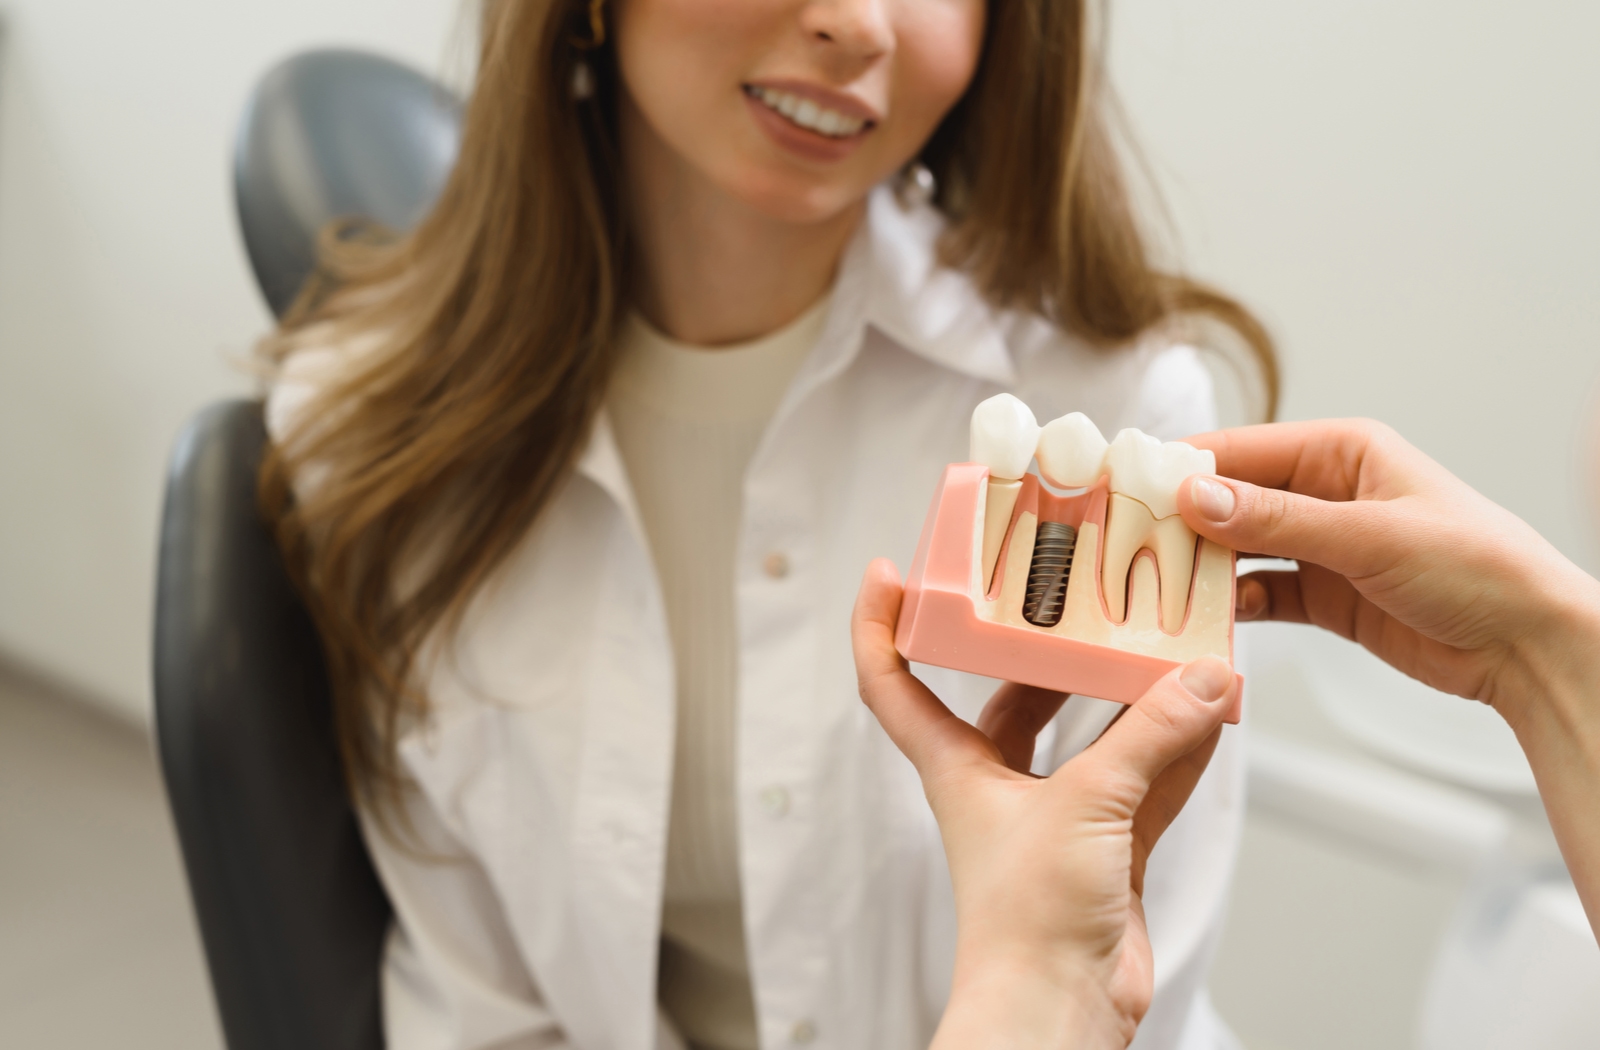 A dentist explaining to their female patient about dental implants while using a plastic model to simulate the procedure